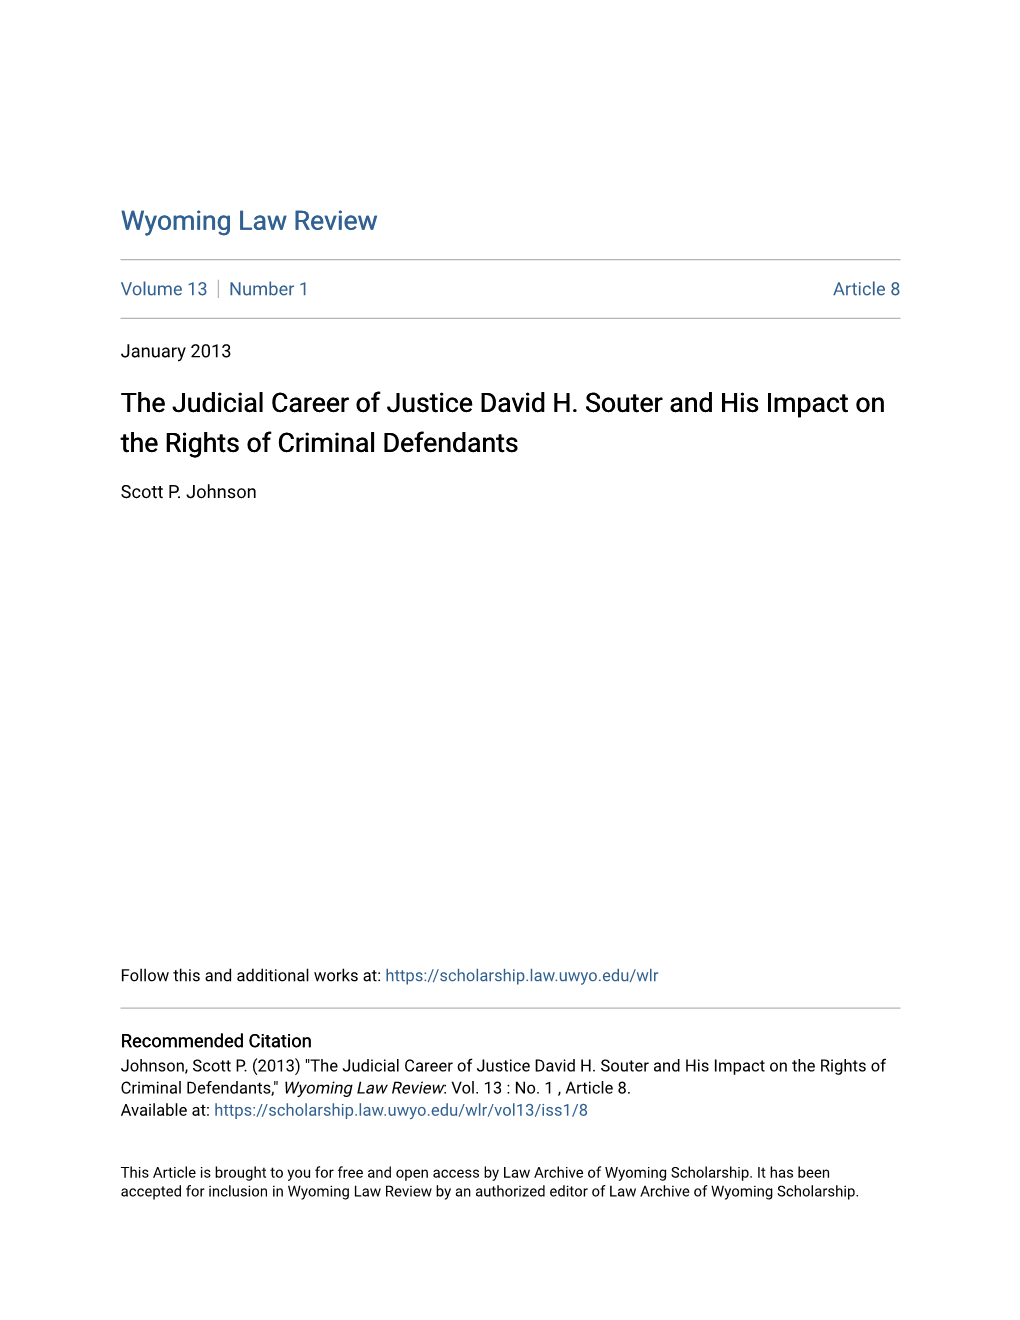 The Judicial Career of Justice David H. Souter and His Impact on the Rights of Criminal Defendants